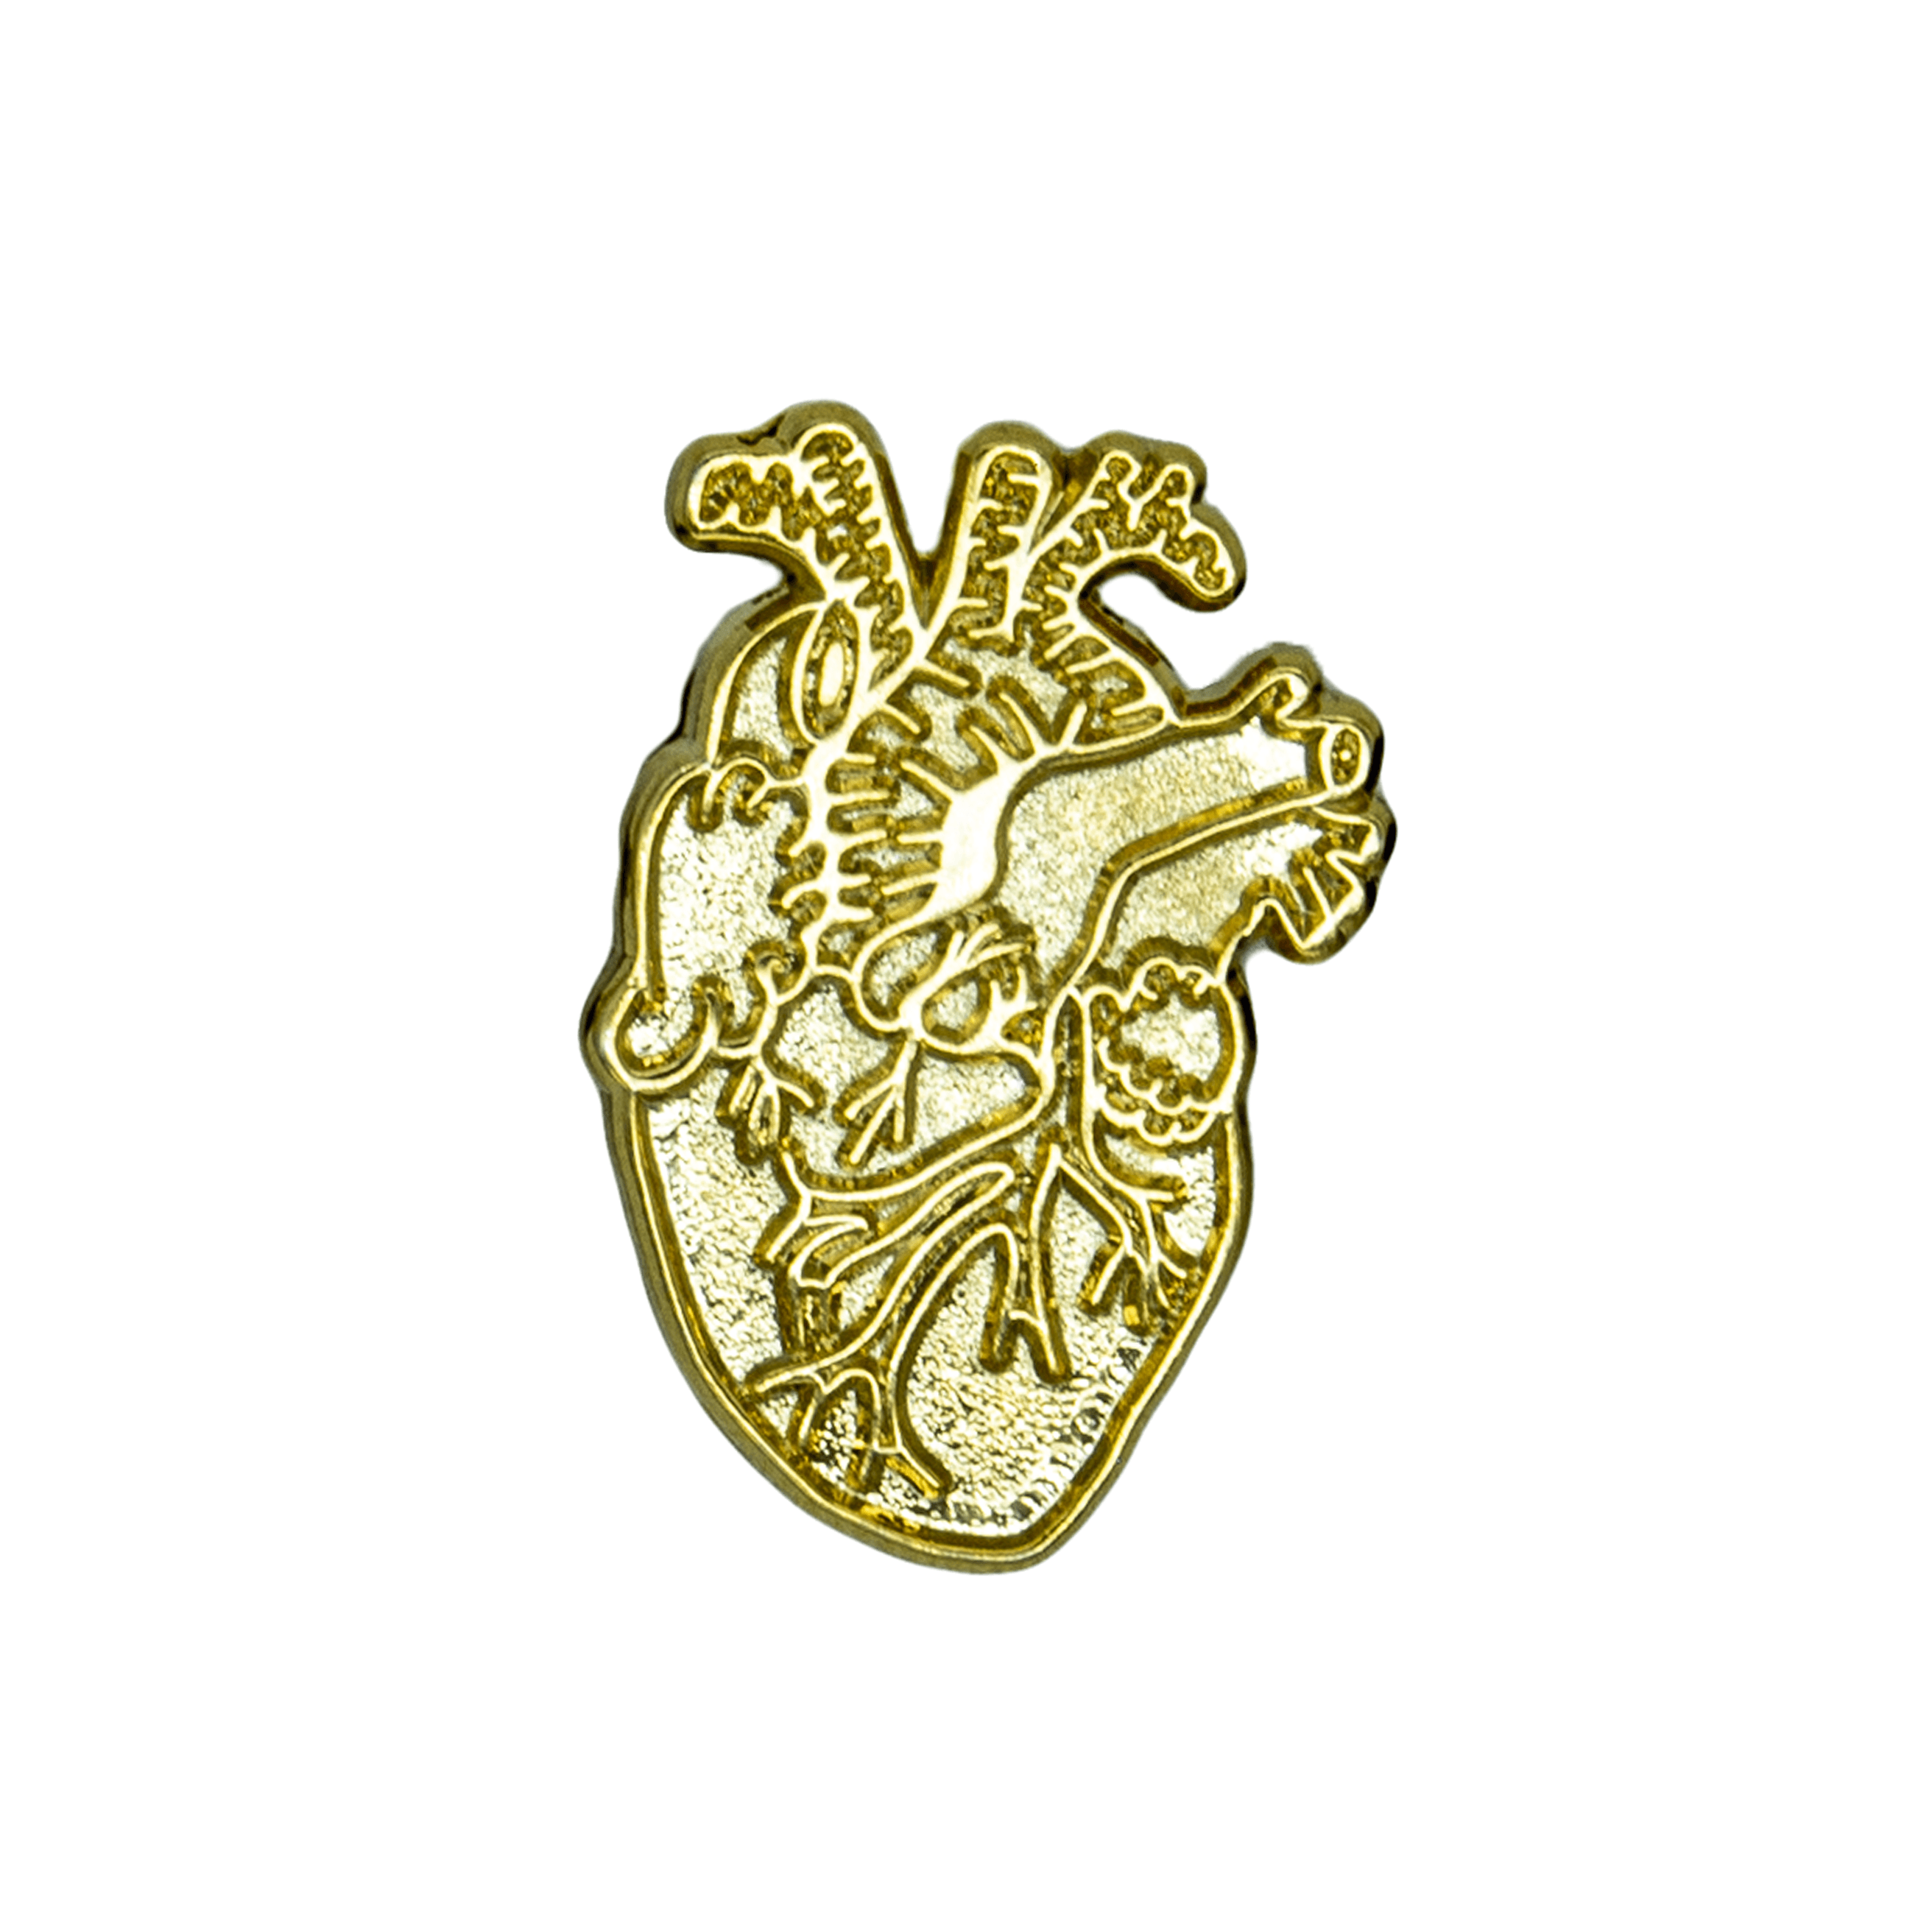 Anatomical Heart Pin | Raw for Modding